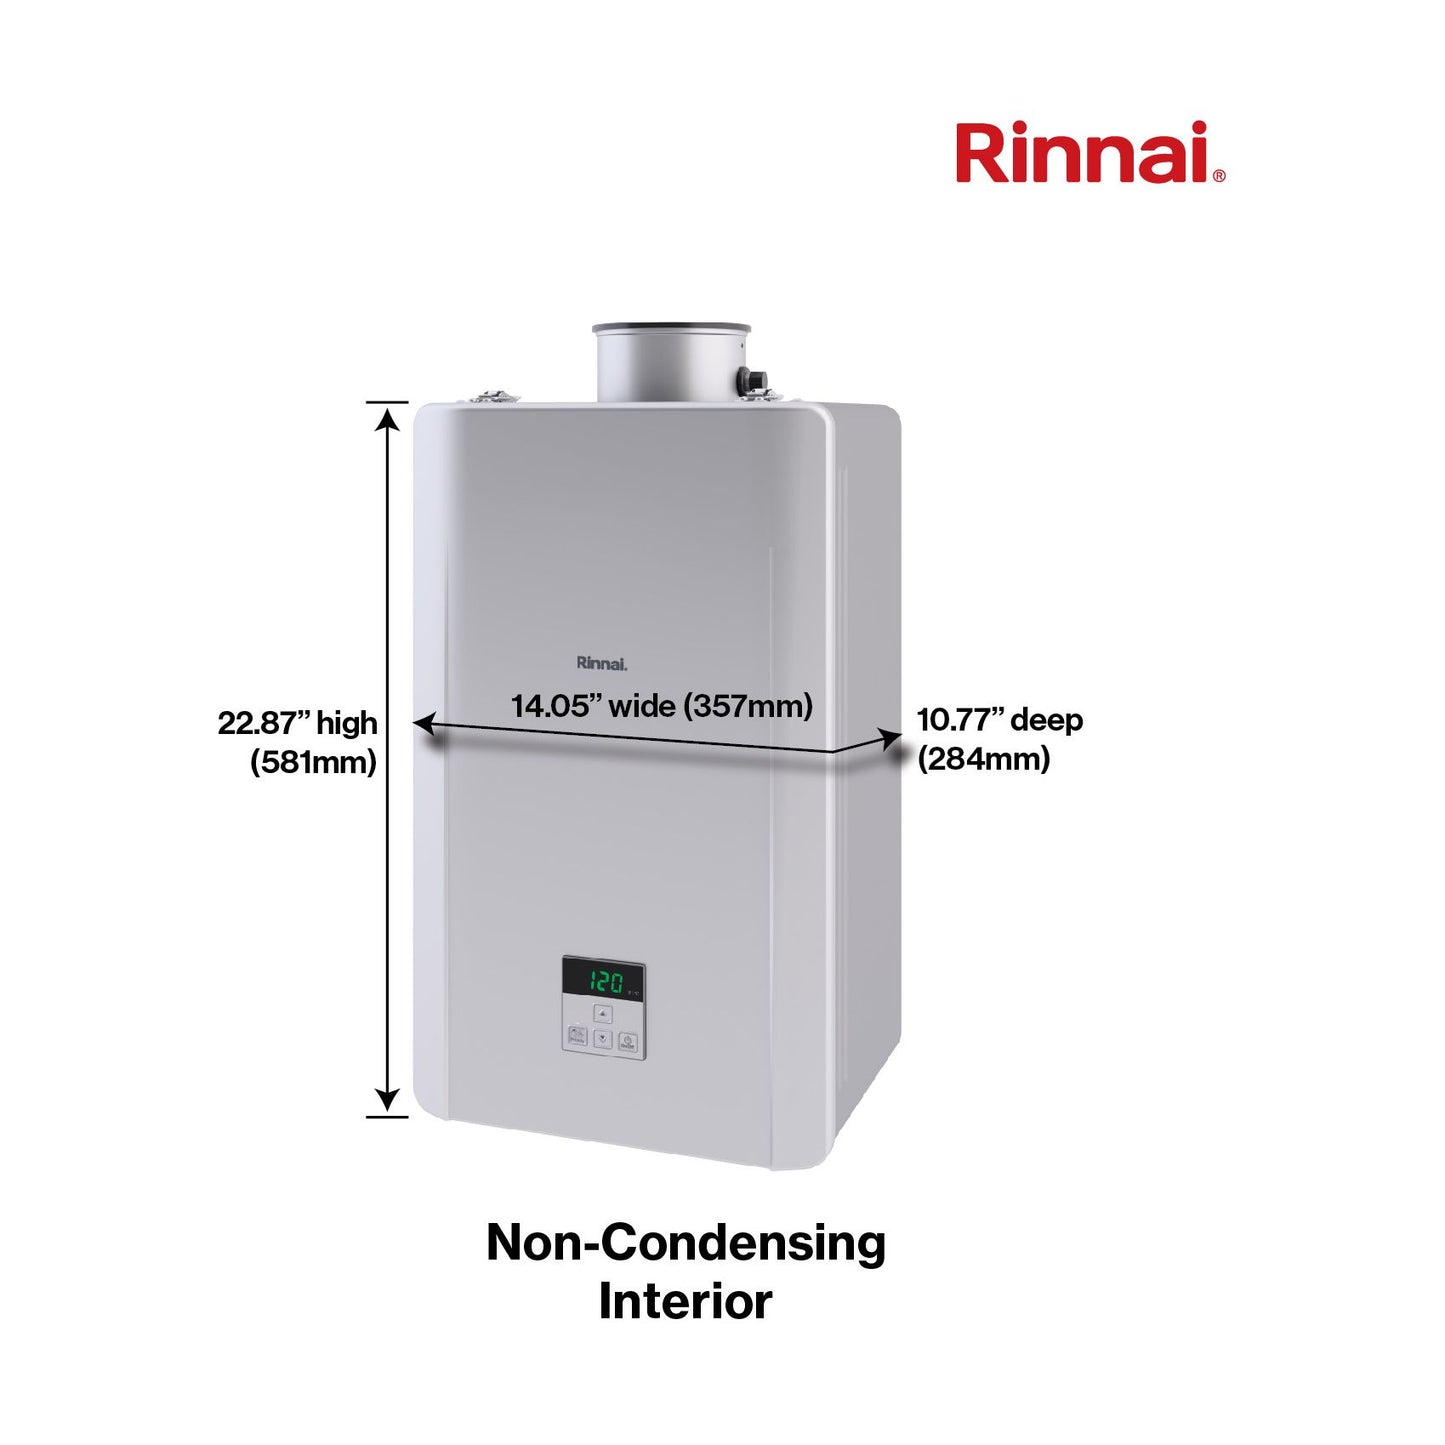 RE180IN - 180,000 BTU High Efficiency Non-Condensing Tankless Water Heater - NG